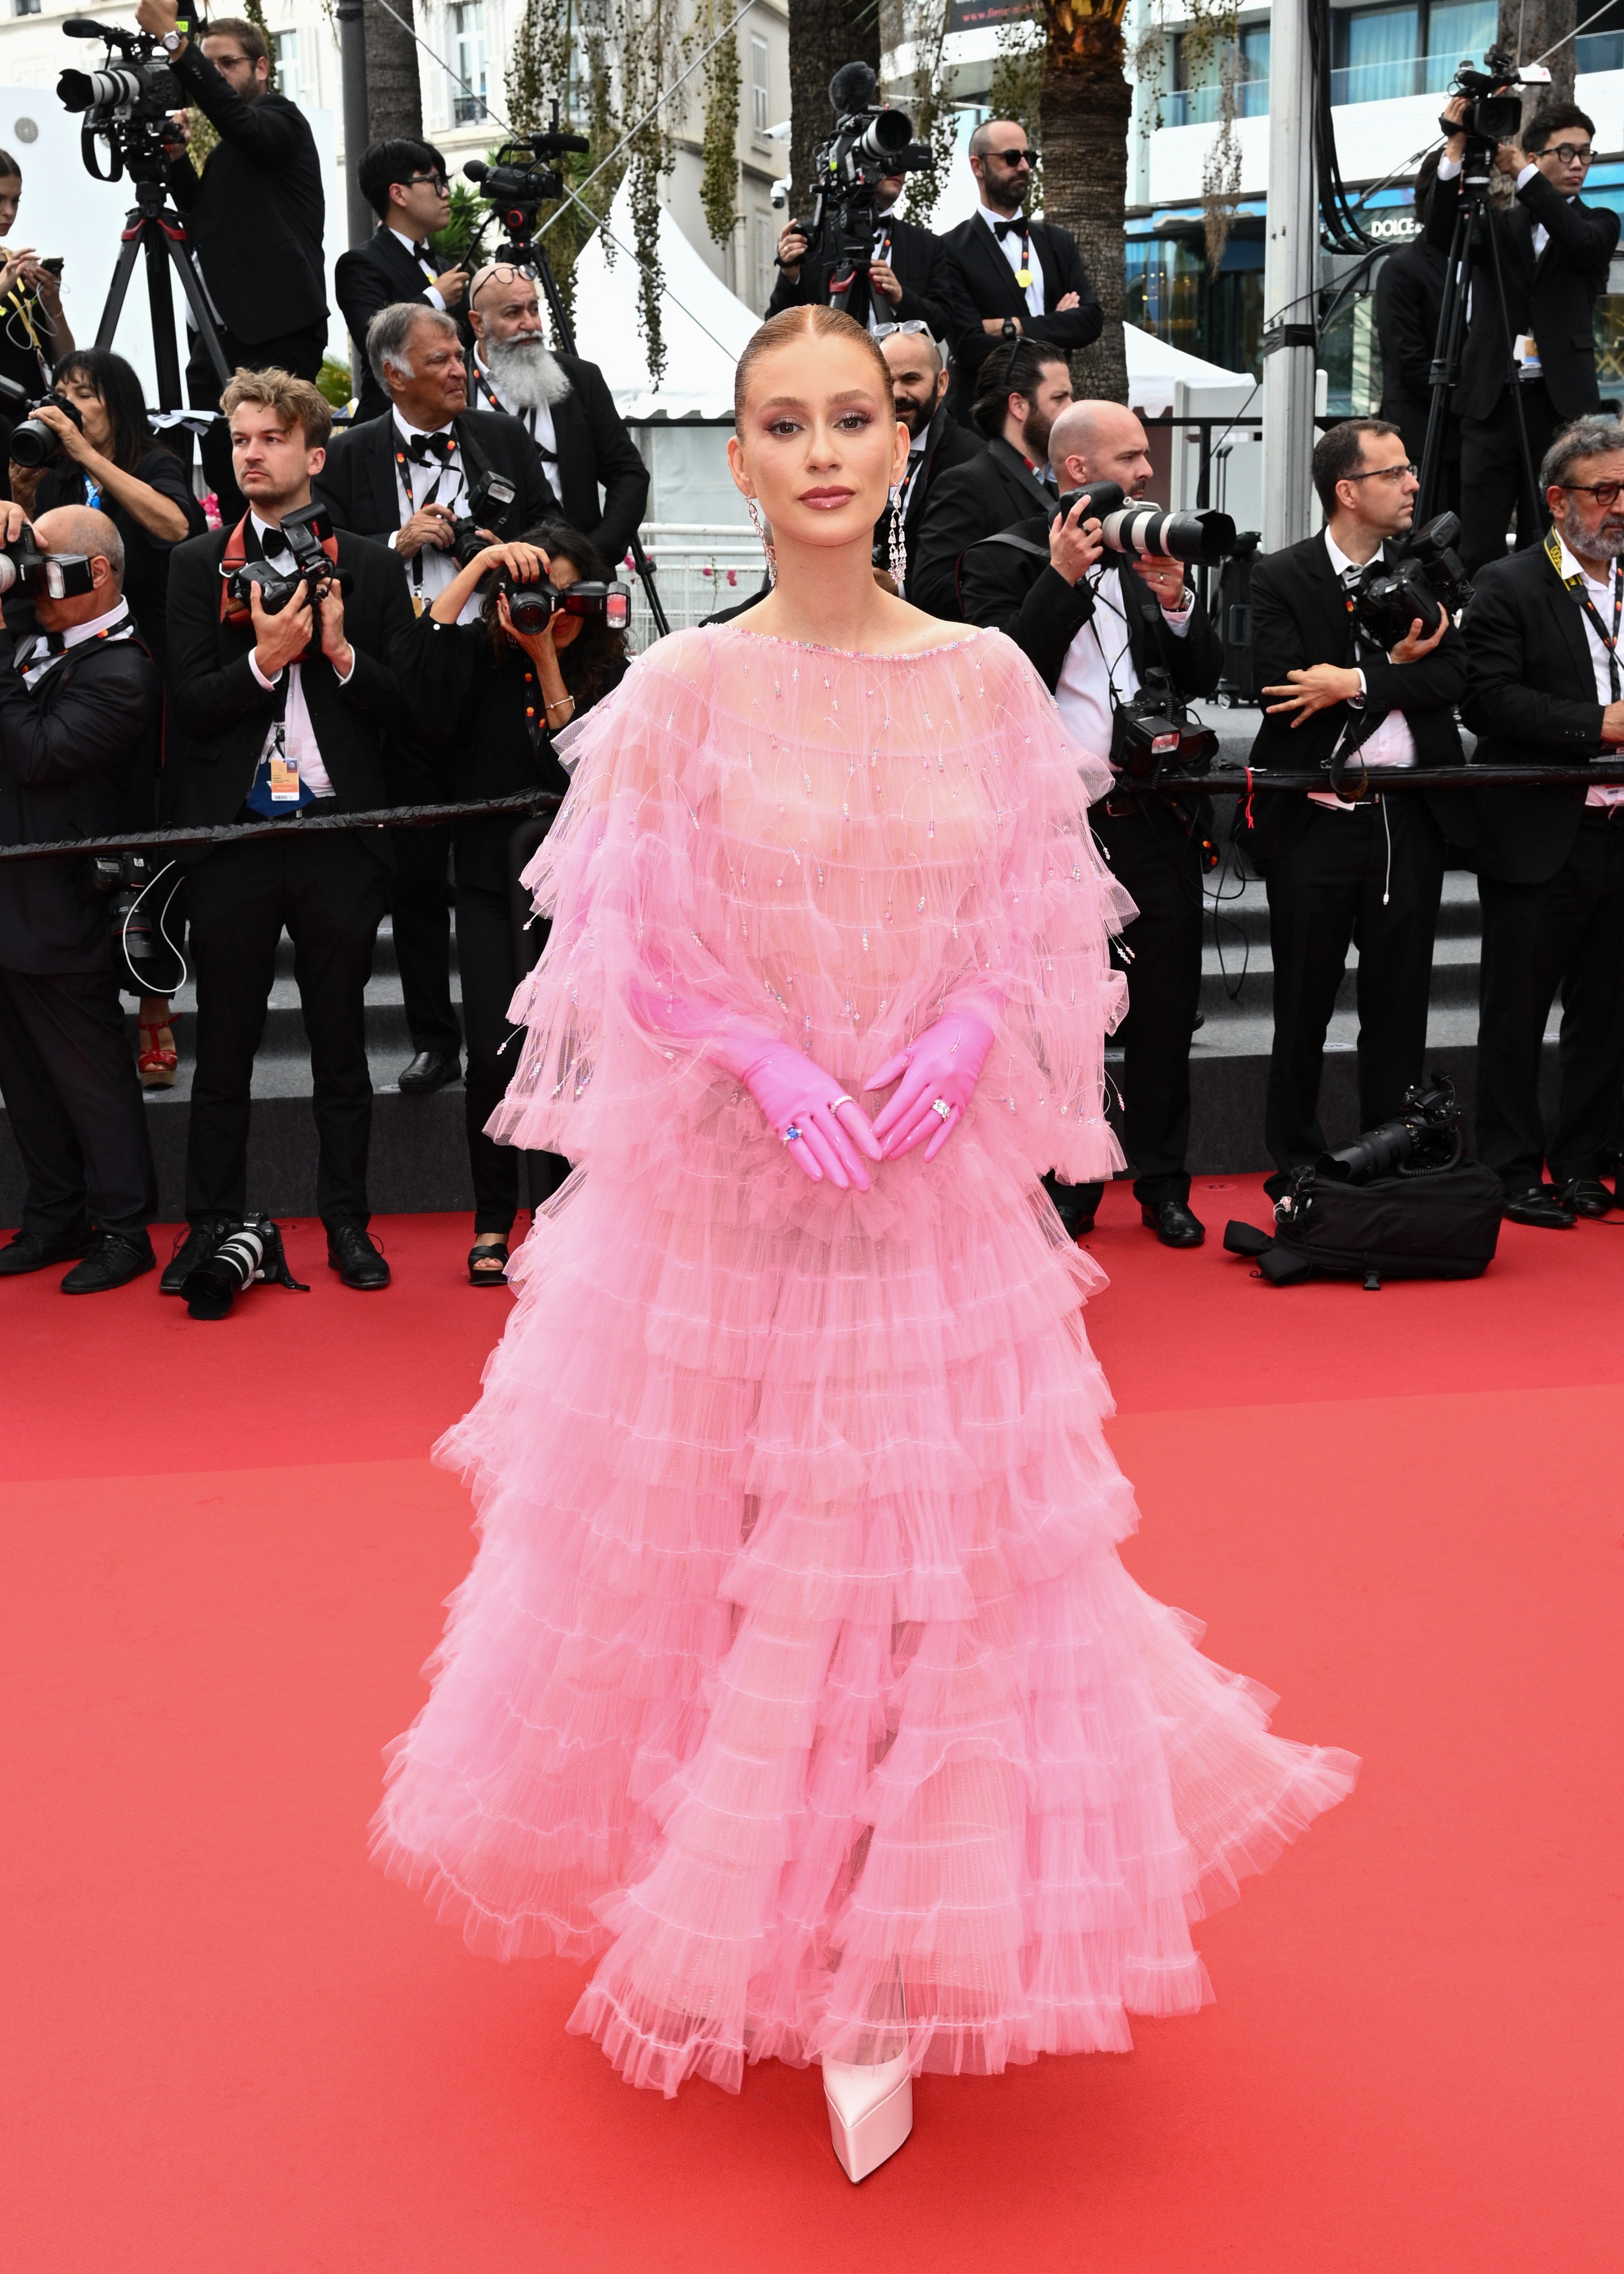 CANNES, FRANCE - MAY 23: Marina Ruy Barbosa attends the screening of "Decision To Leave (Heojil Kyolshim)" during the 75th annual Cannes film festival at Palais des Festivals on May 23, 2022 in Cannes, France. (Photo by Stephane Cardinale - Corbis/Corbis  (Foto: Corbis via Getty Images)